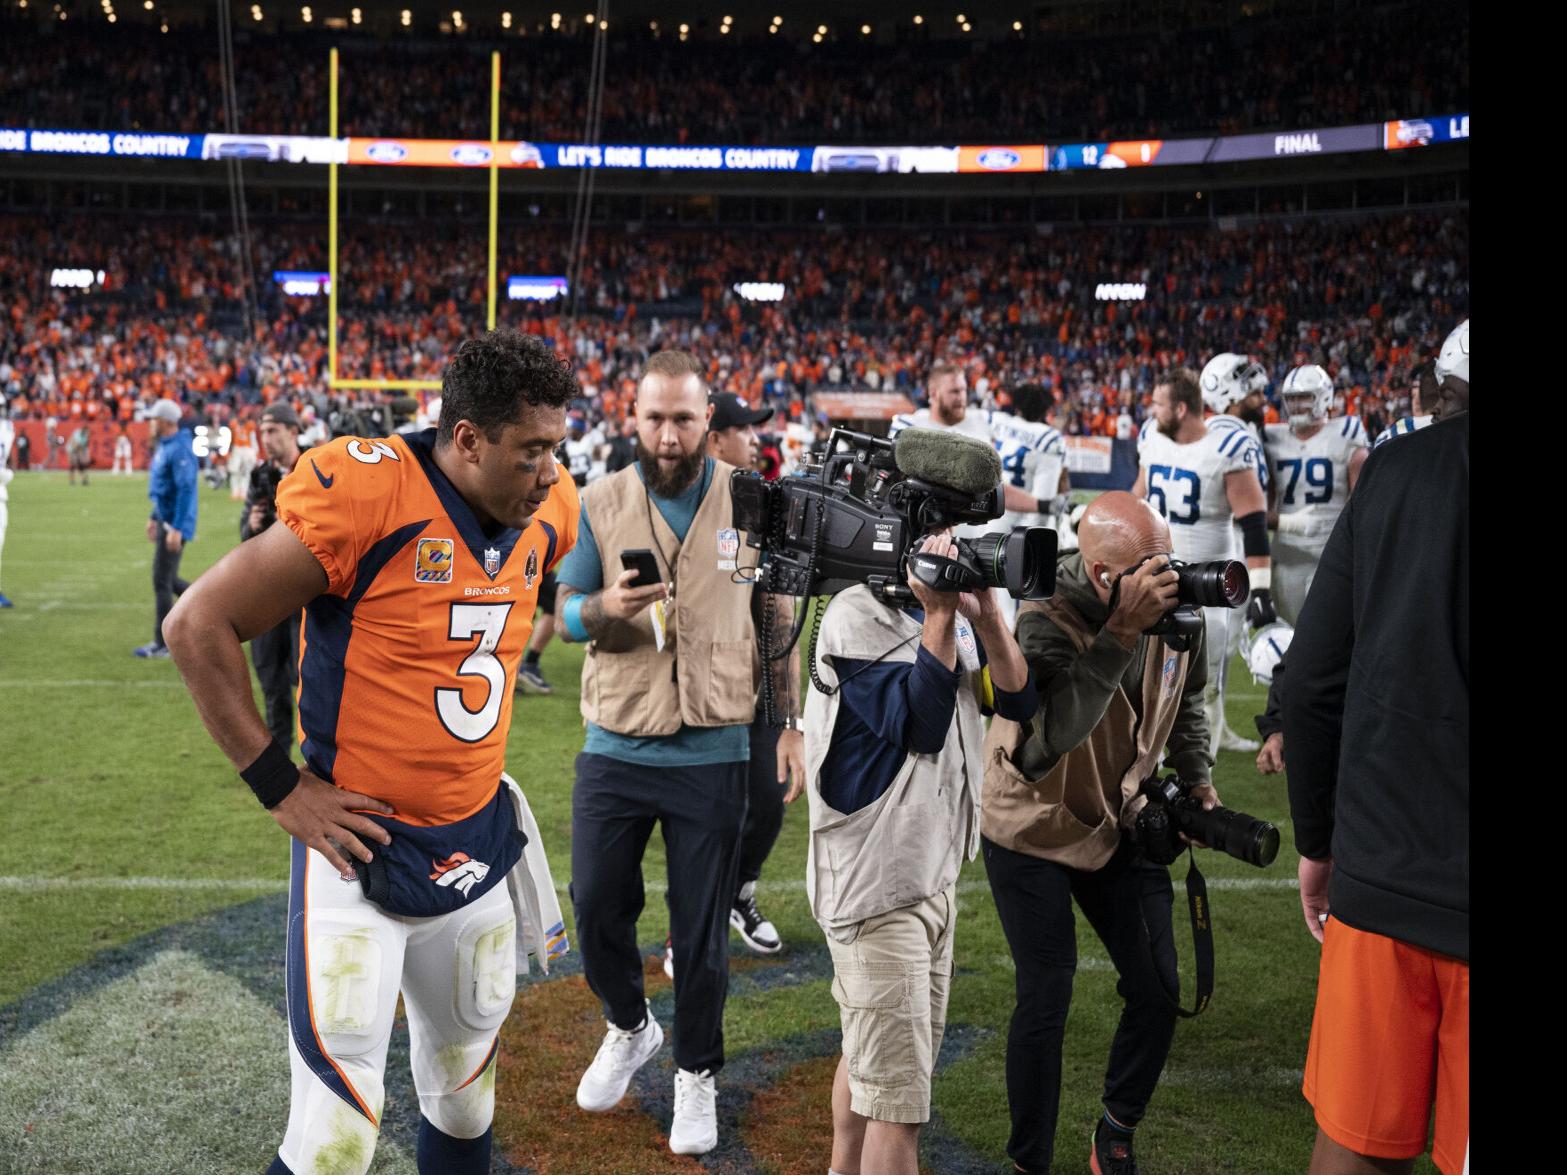 NFL fans, media, players react to Denver Broncos' loss to Colts